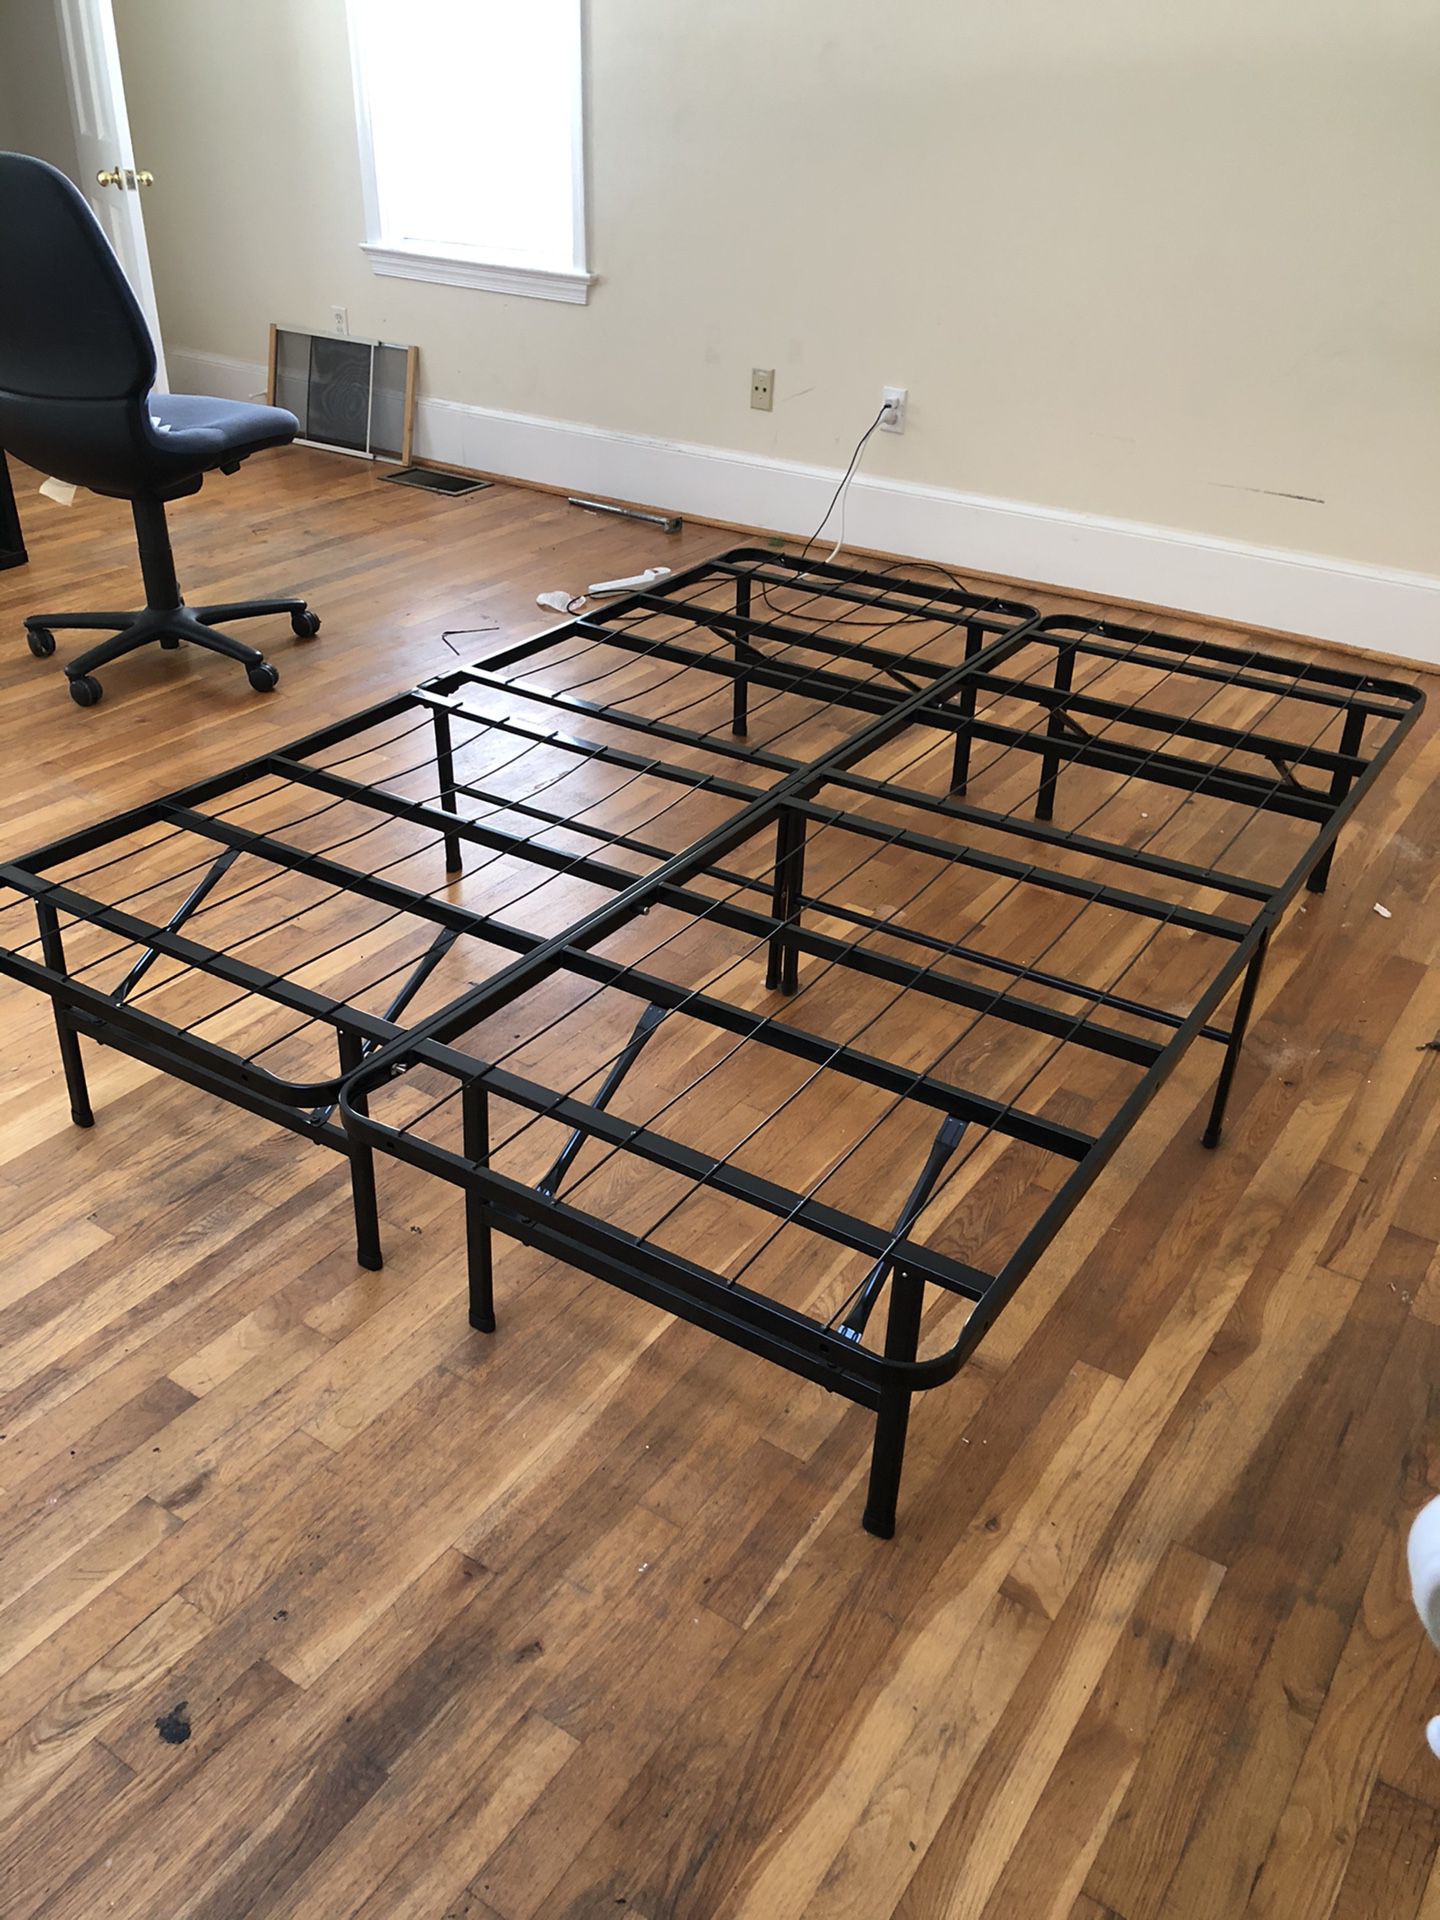 Full Bed Frame (And mattress)